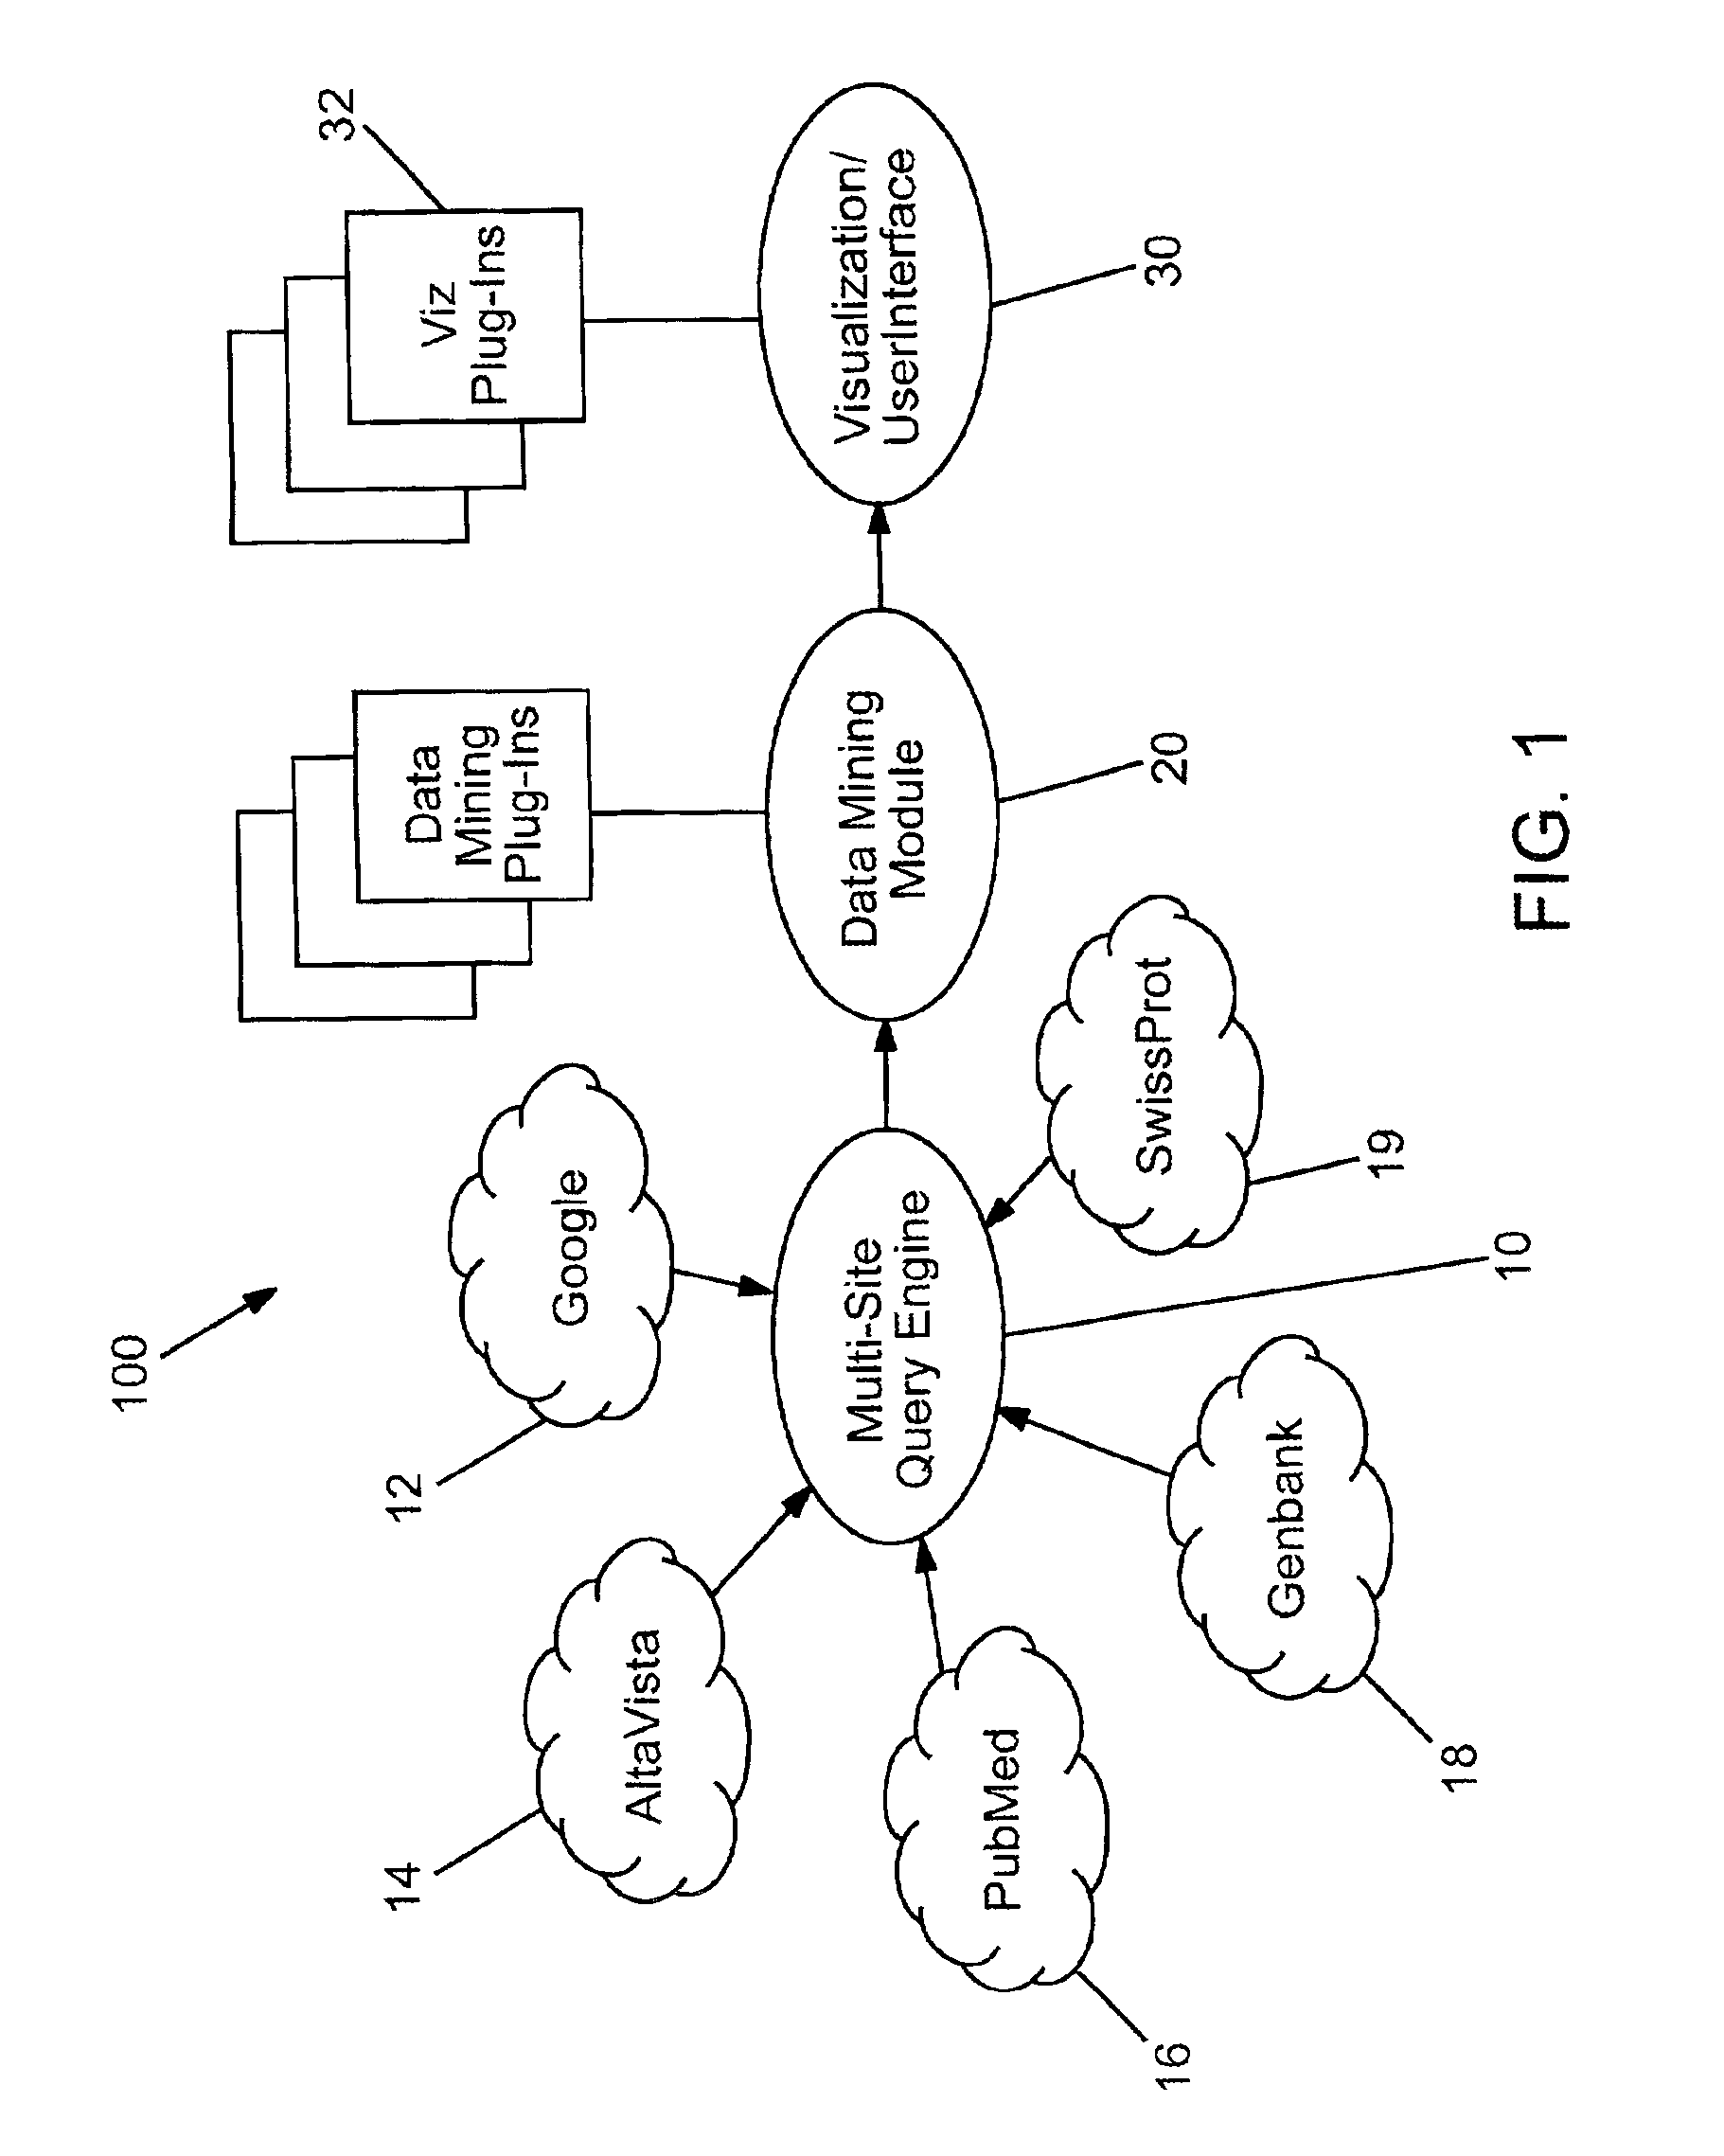 Domain specific knowledge-based metasearch system and methods of using